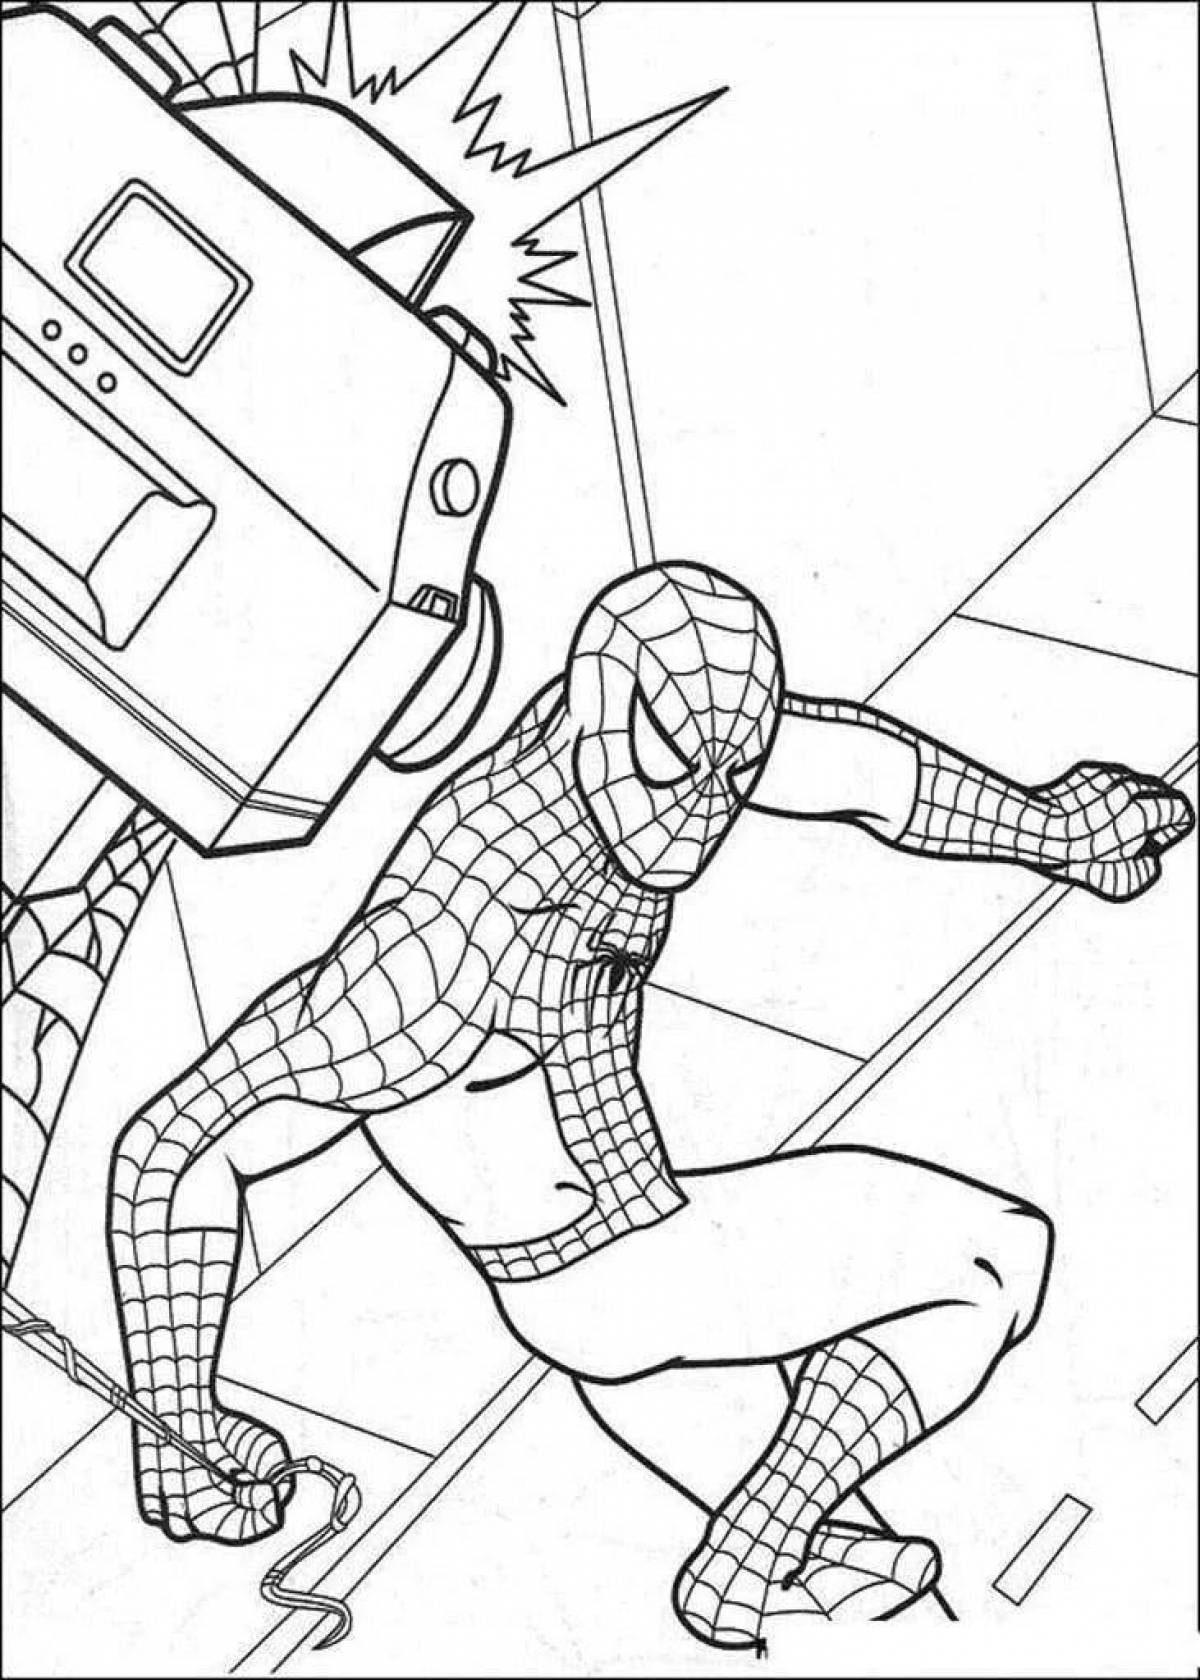 Adorable Spiderman coloring book for kids 6-7 years old